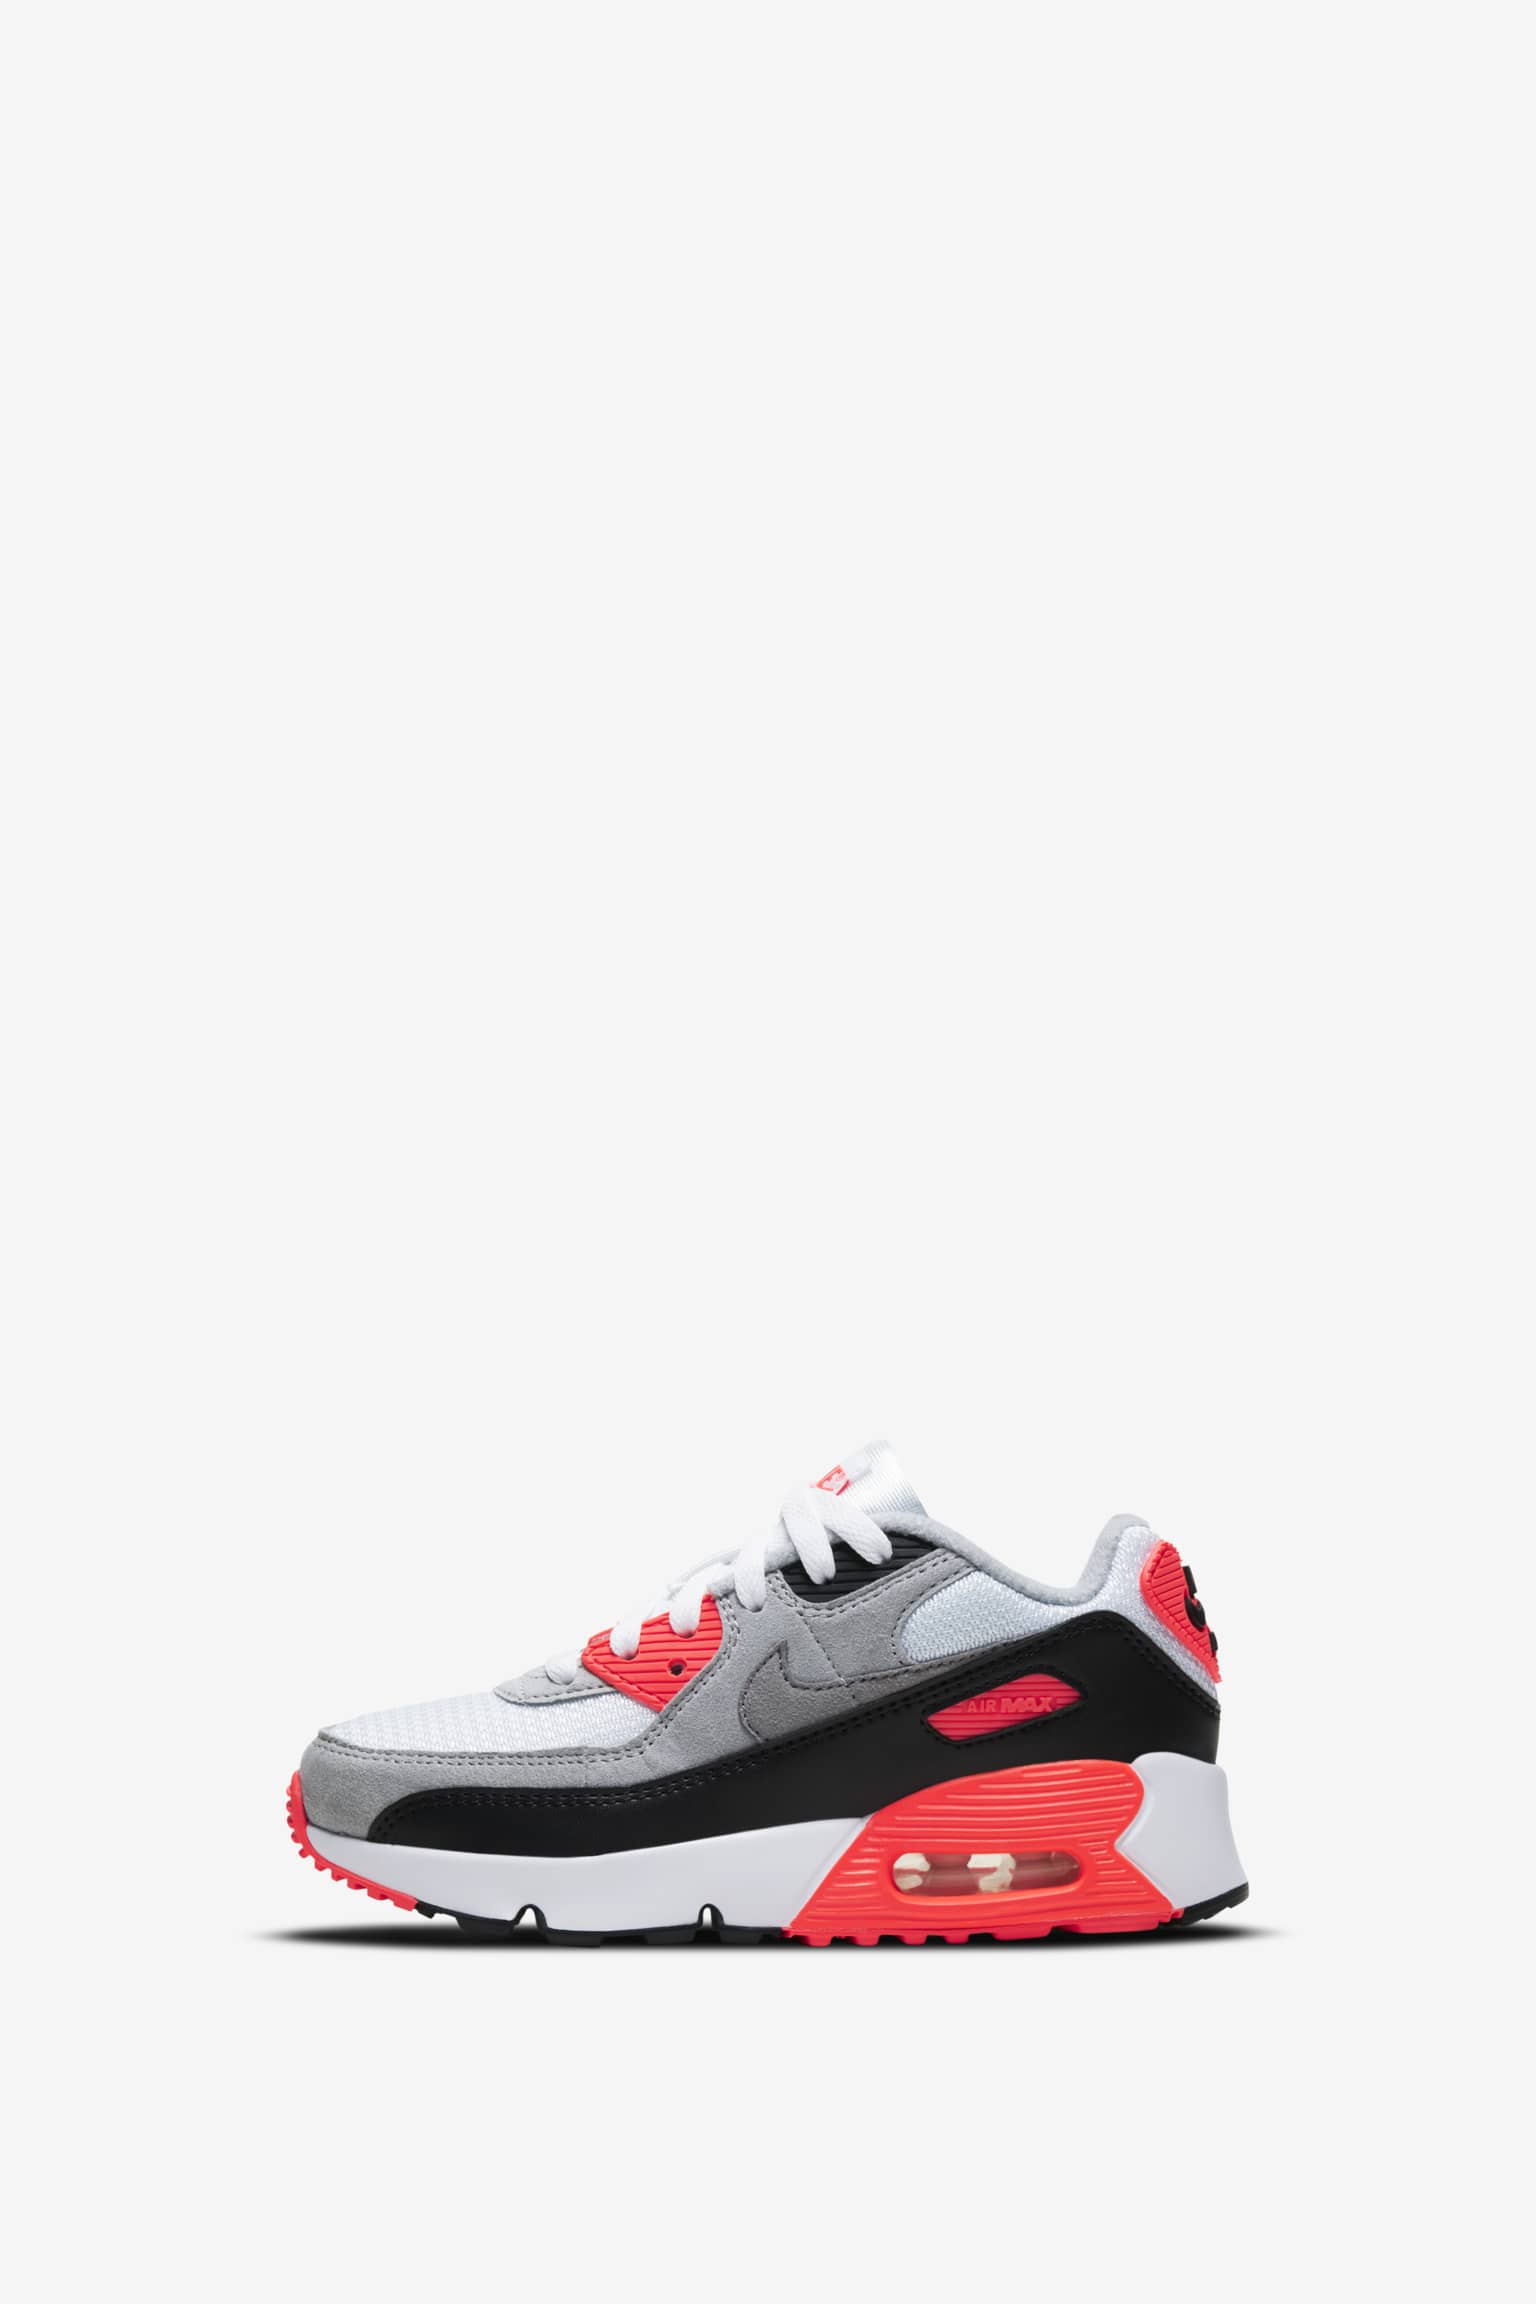 Big Kids' Air Max 90 'Radiant Red' Release Date. Nike SNKRS